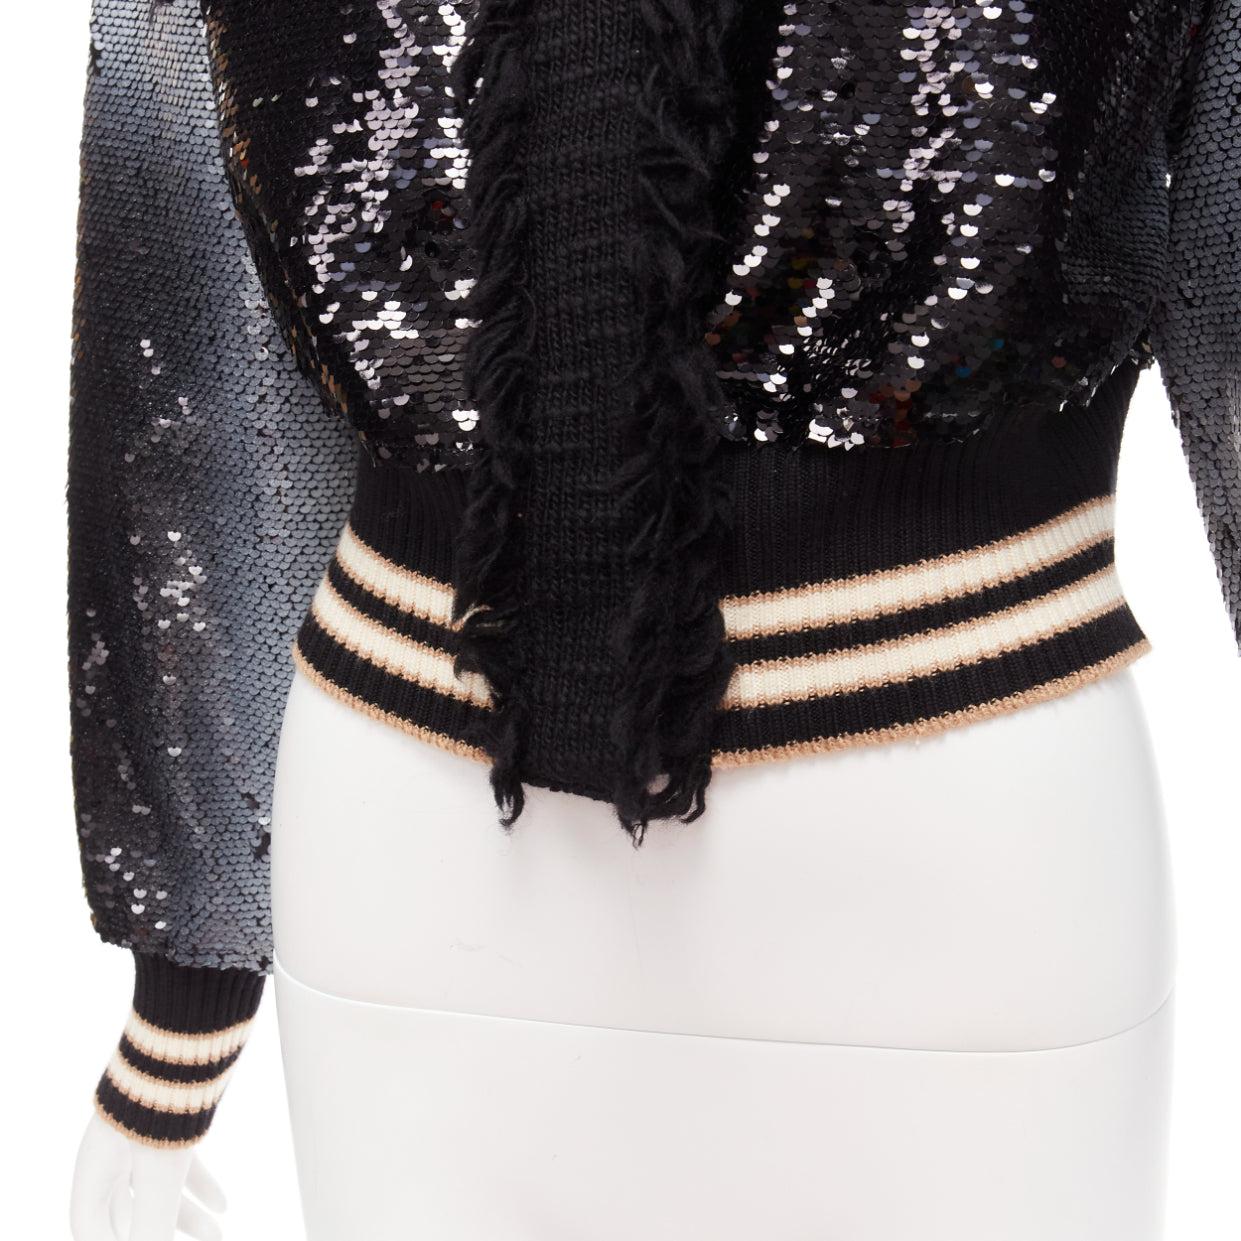 AVIU black white spray paint effect sequins cropped bomber jacket IT38
Reference: AAWC/A00611
Brand: Aviu
Model: IQ3200
Material: Polyester
Color: Black, White
Pattern: Solid
Closure: Snap Buttons
Extra Details: White spray paint effect on sequins.